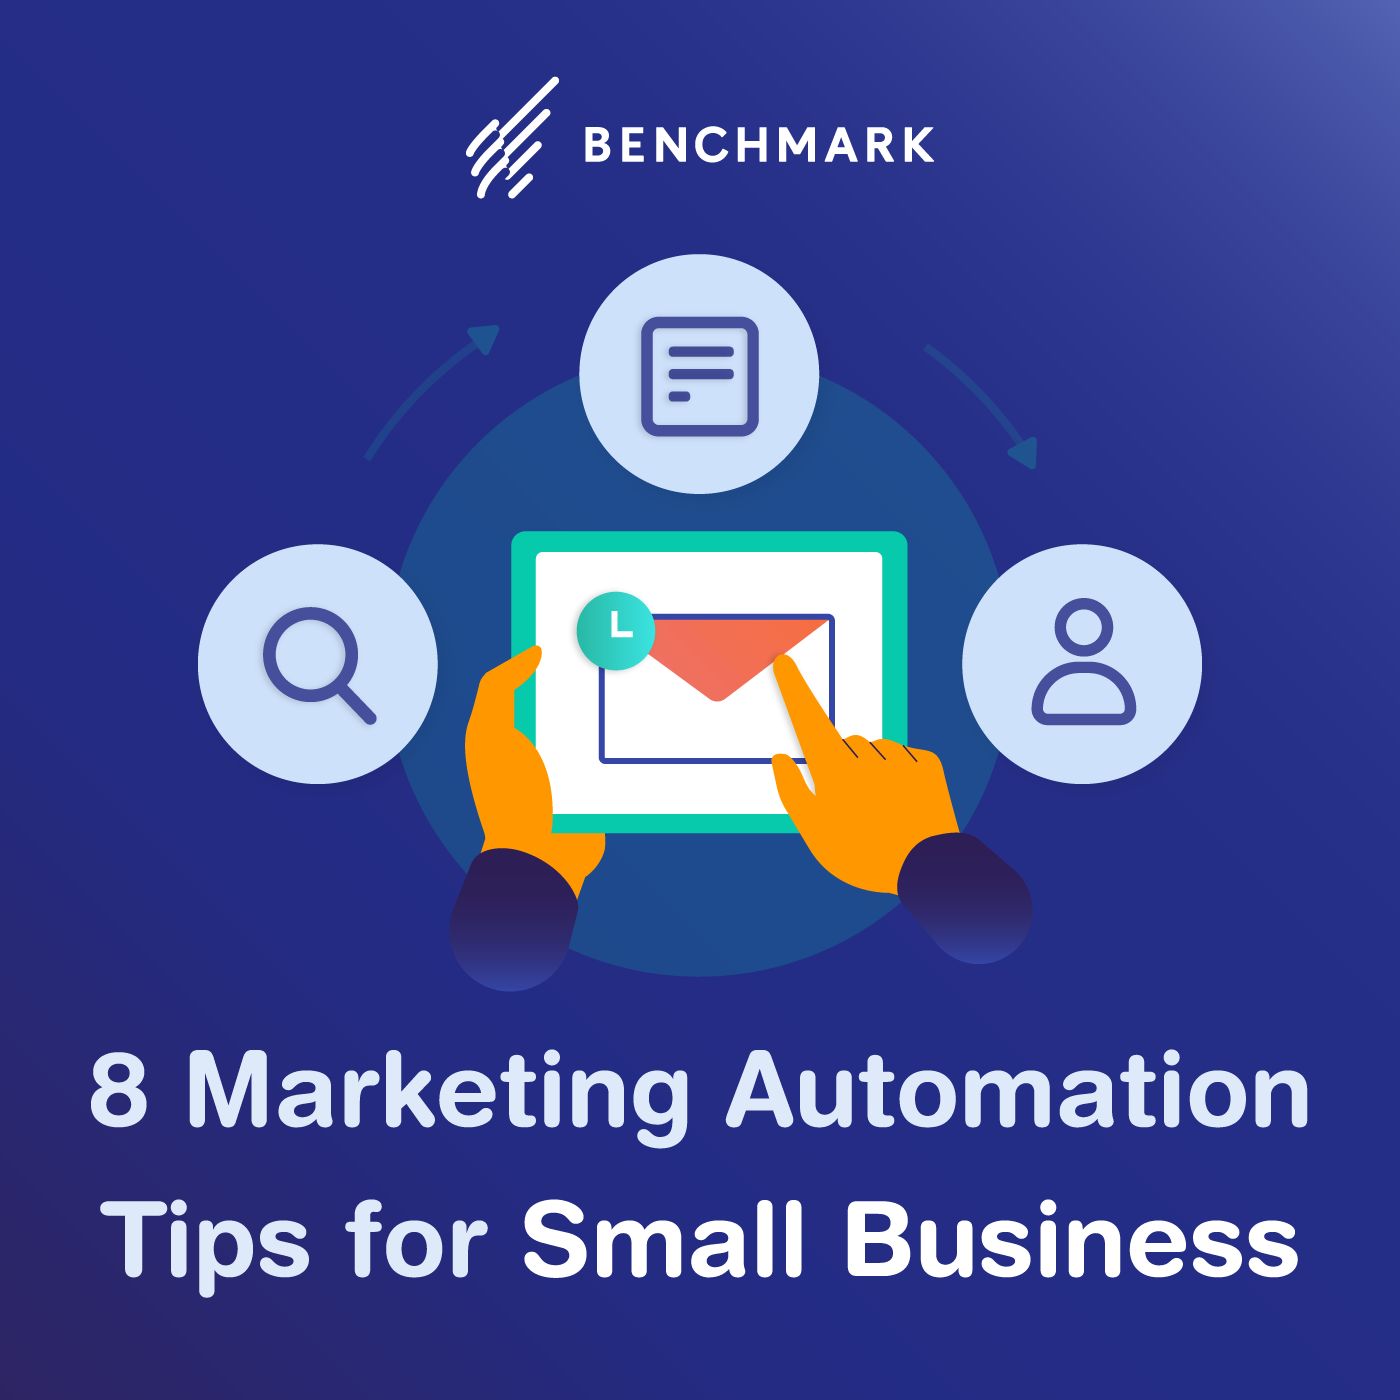 8 Marketing Automation Tips for Small Business